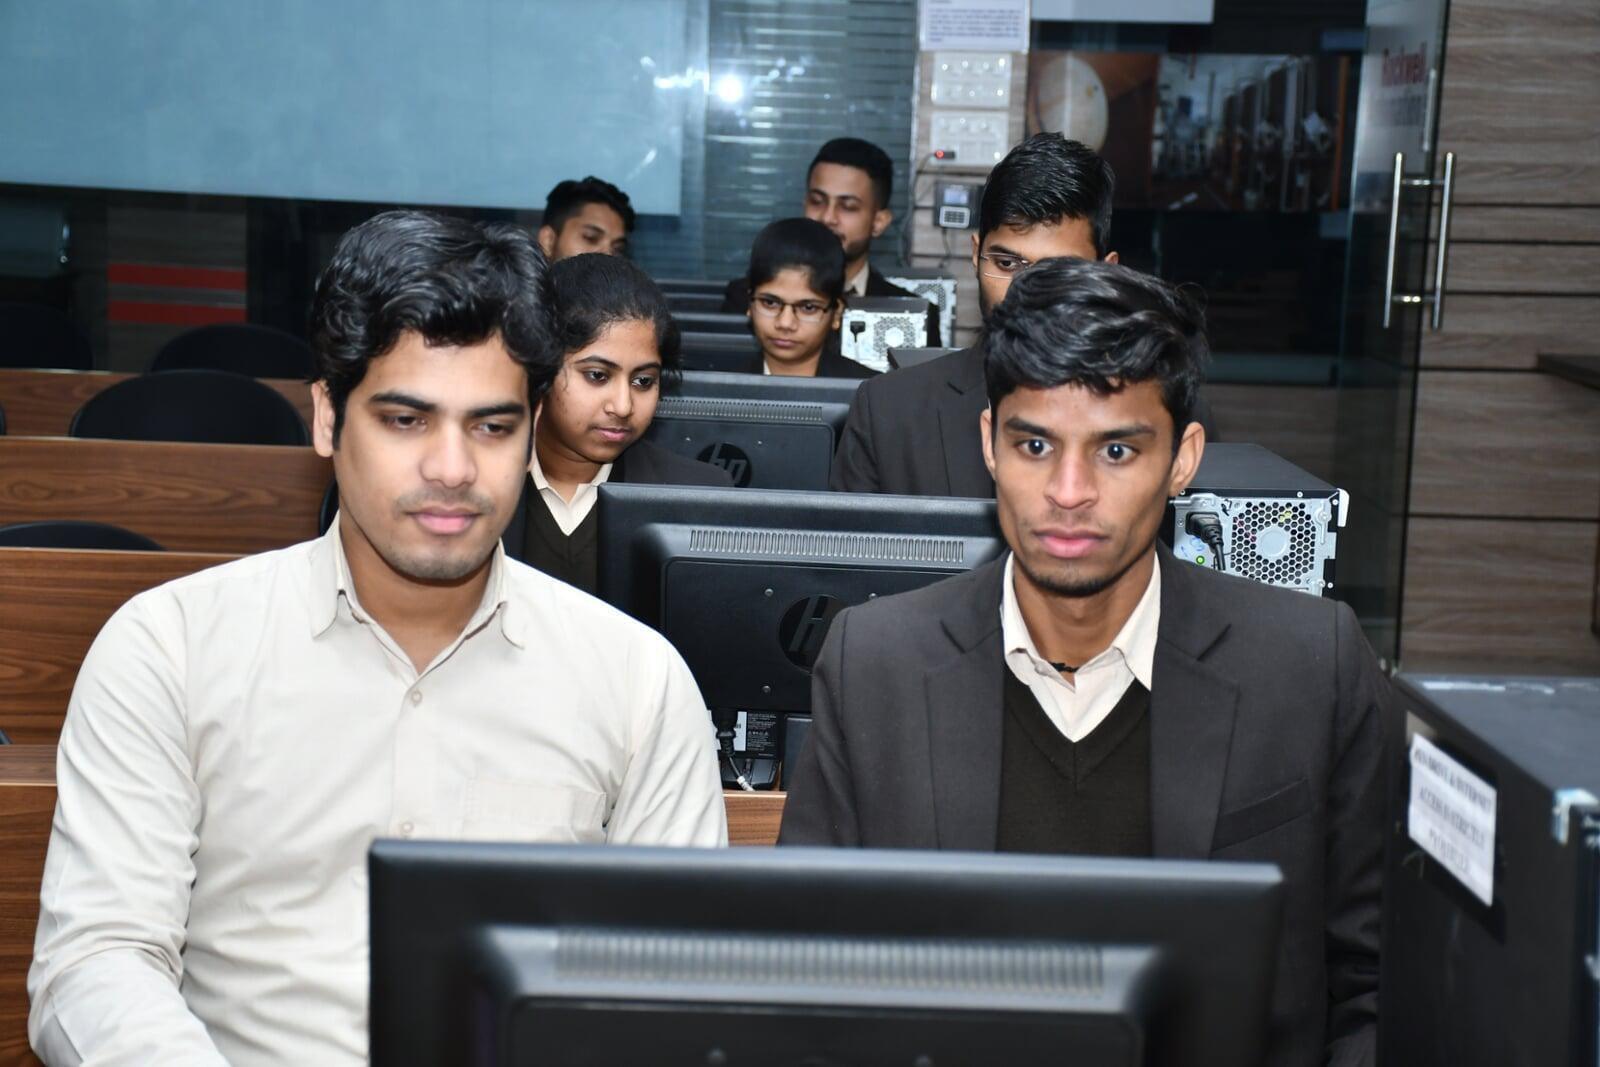 R Systems Lab 1 with students